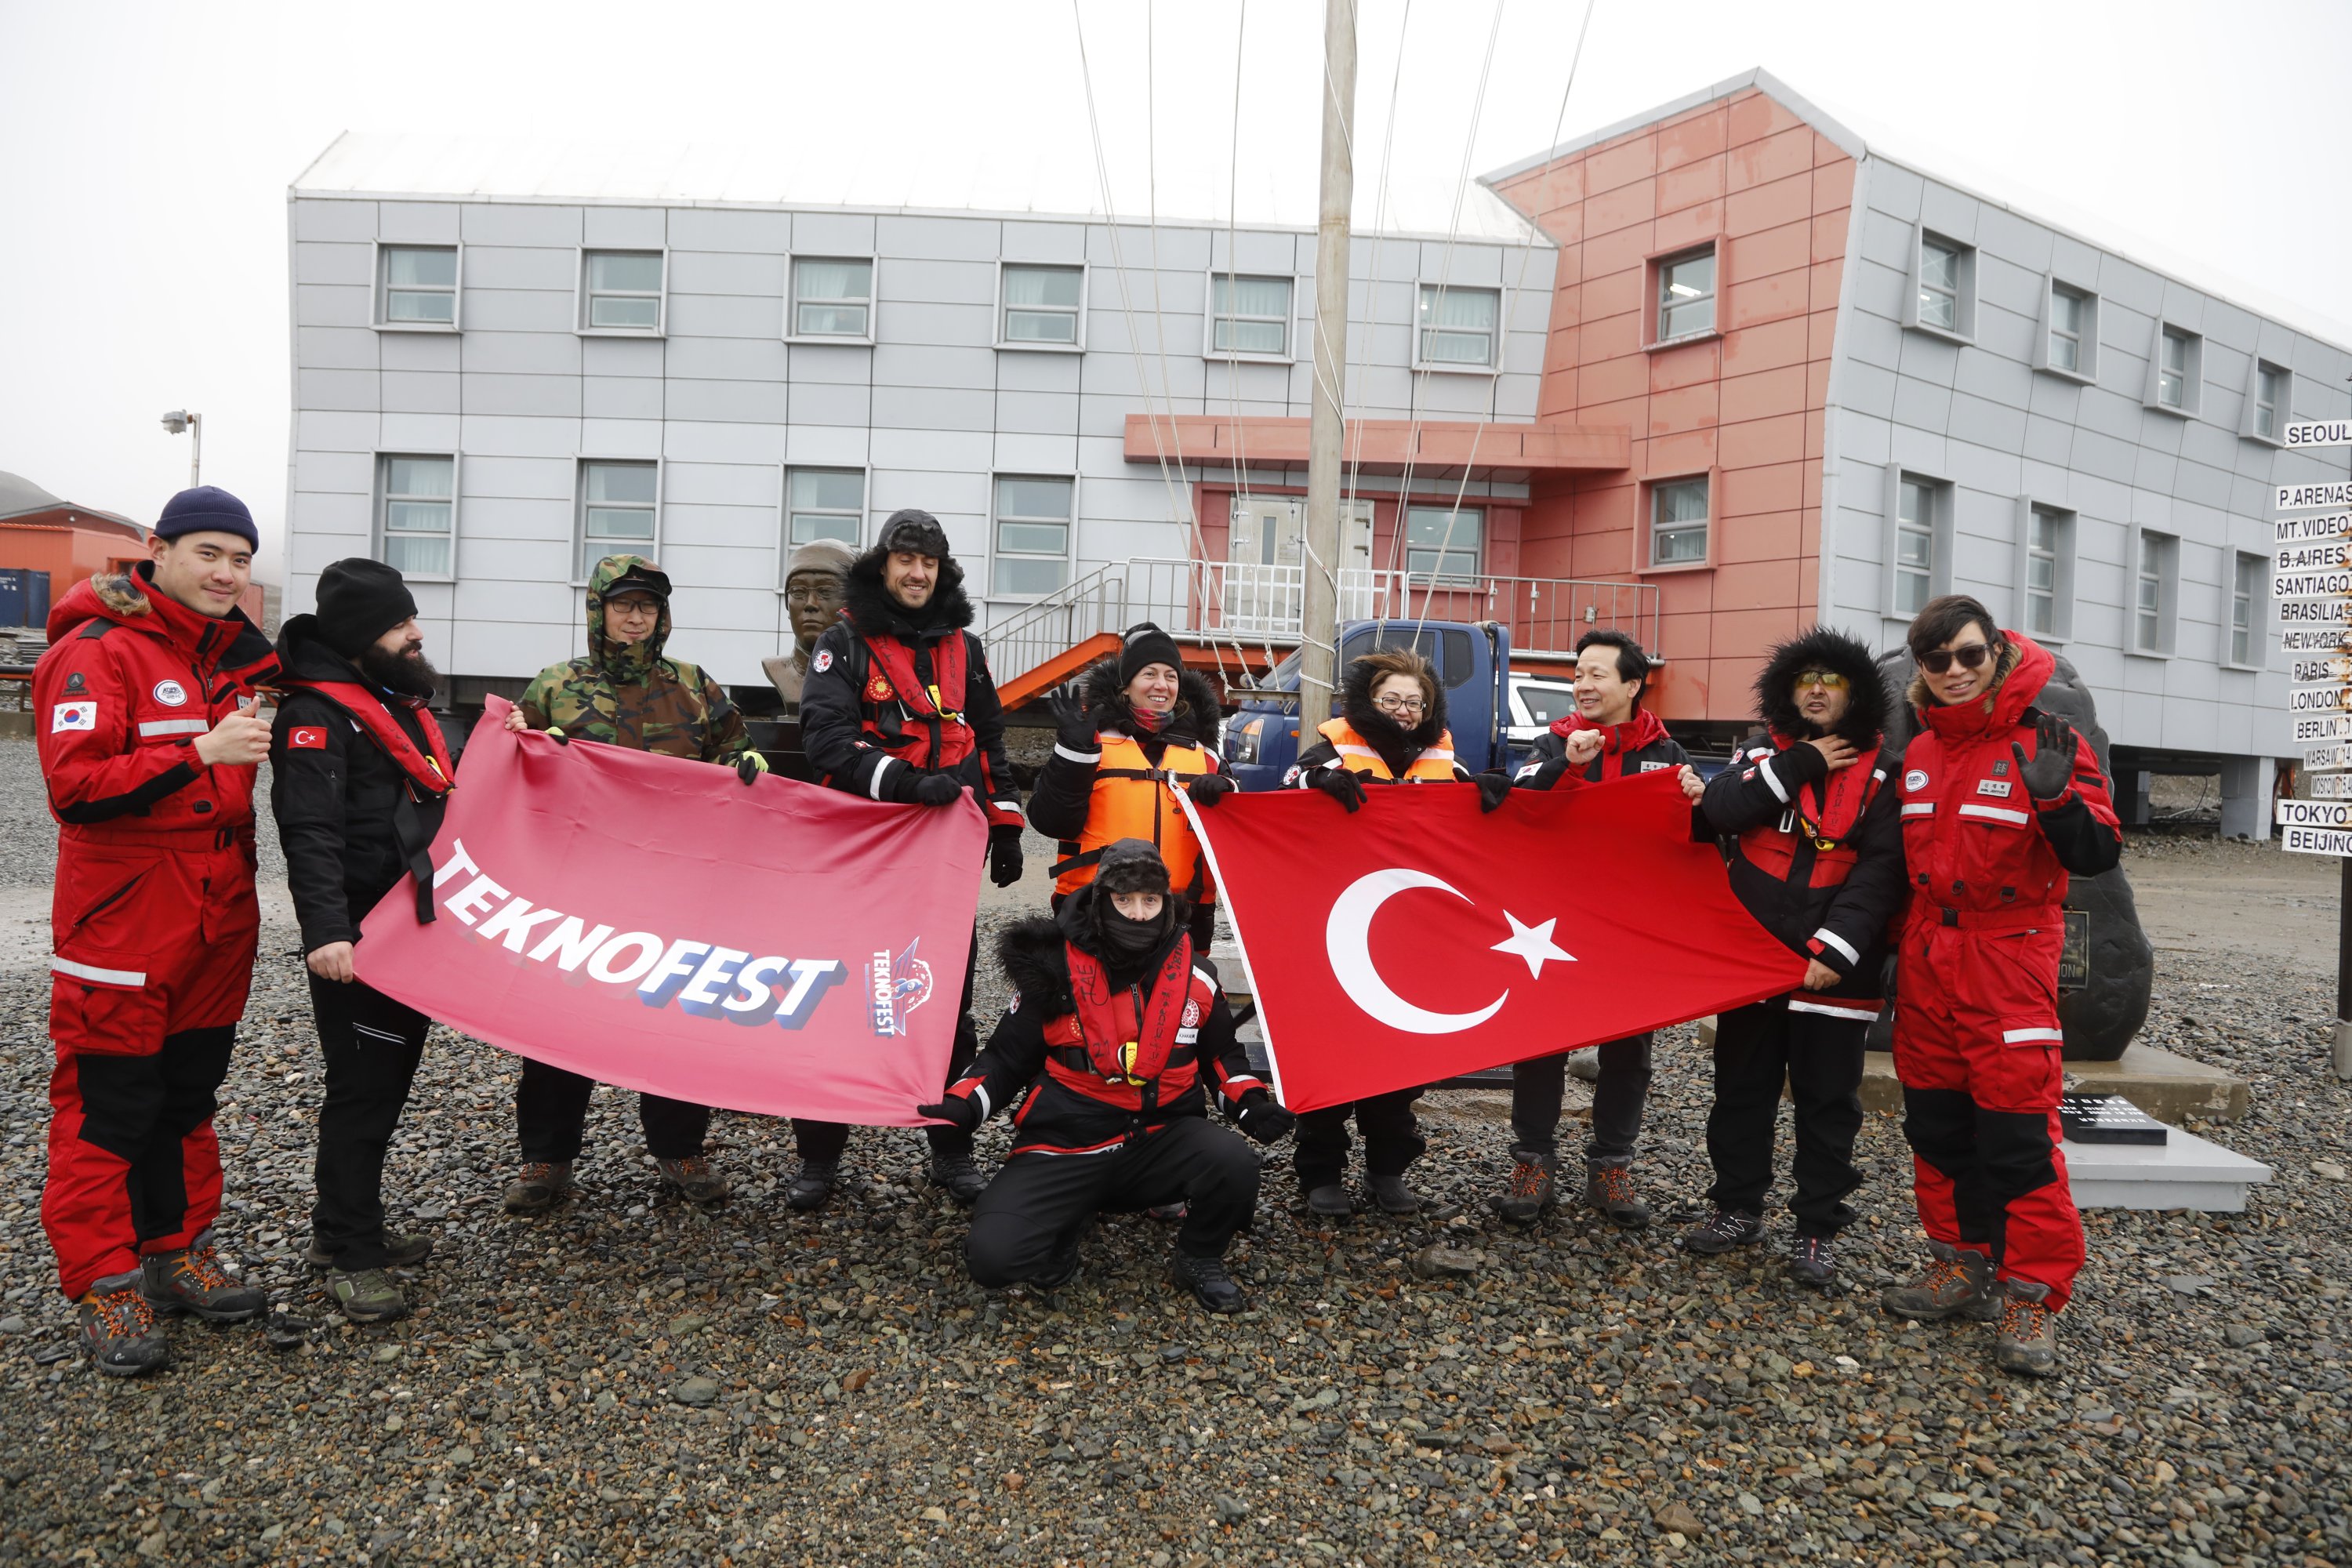 The team poses with a Turkish flag and a TeknoFest banner at the South Korean base. (Photos by Hayrettin Bektaş)